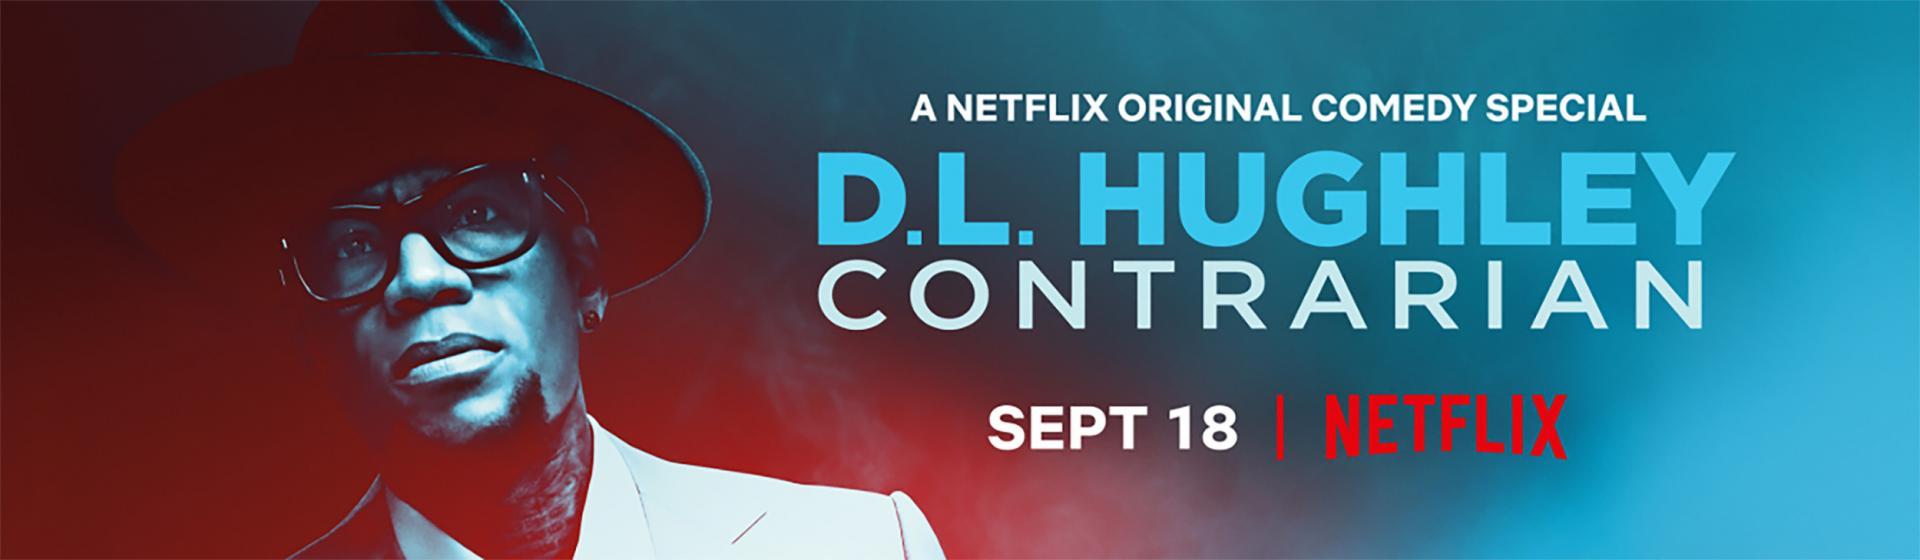 D.L. Hughley: Contrarian  - Posters